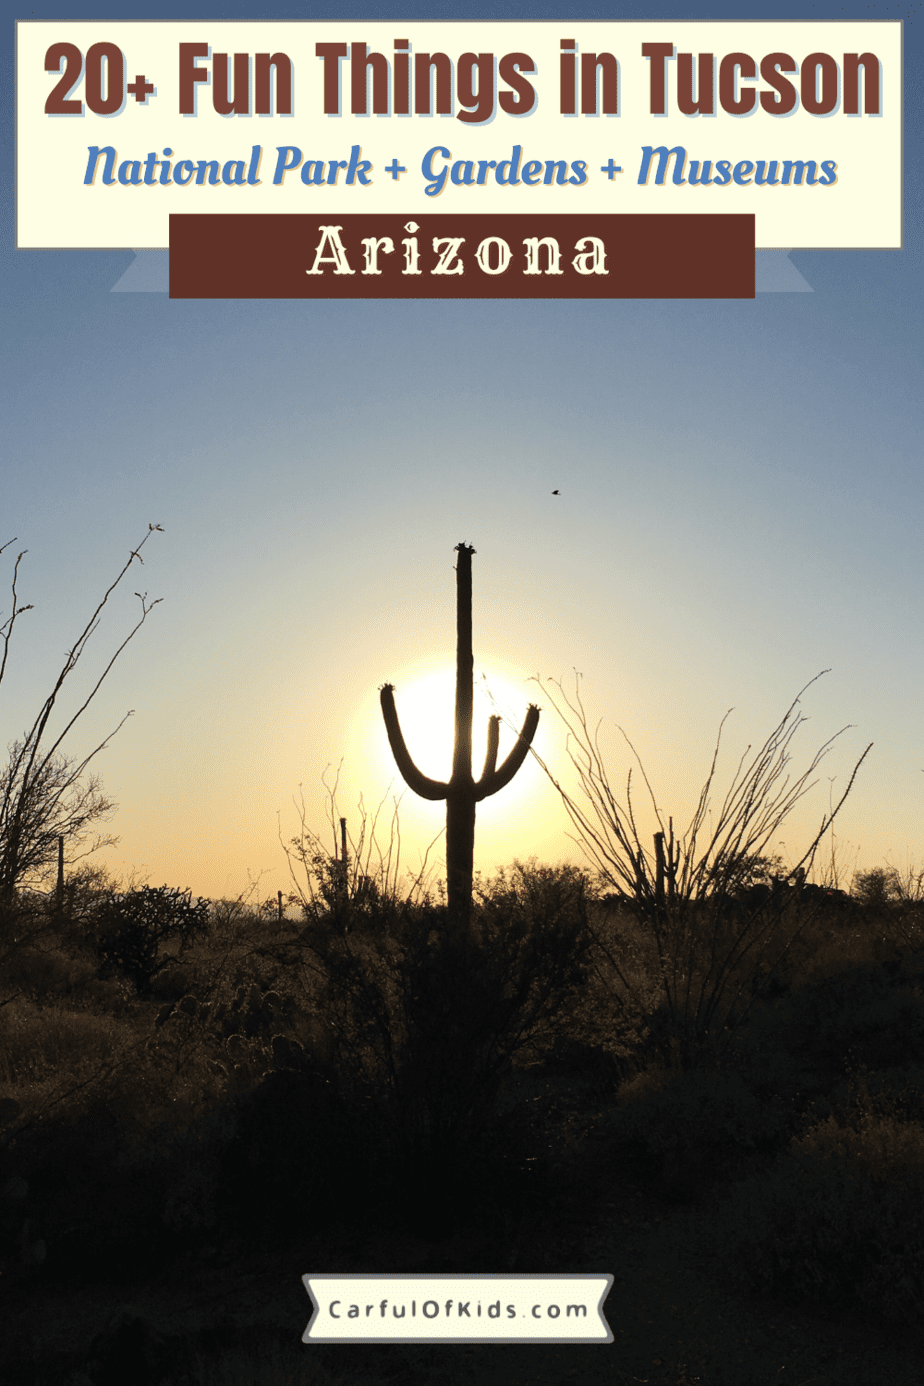 As the soul of the Sonoran Desert visitors find outdoor areas to explore, namely Saguaro National Park, in Tucson. Then travelers can experience the culture and history of Tucson from the Mission San Xavier del Bac to its art museums to the Pima Air and Space Museum. Here’s the top 22 things to do in Tucson Arizona on your desert southwest getaway. Top museums in Tucson | What to do in Tucson | Top Aviation Museums in the U.S. #Tucson #Arizona credit: Catherine Parker 